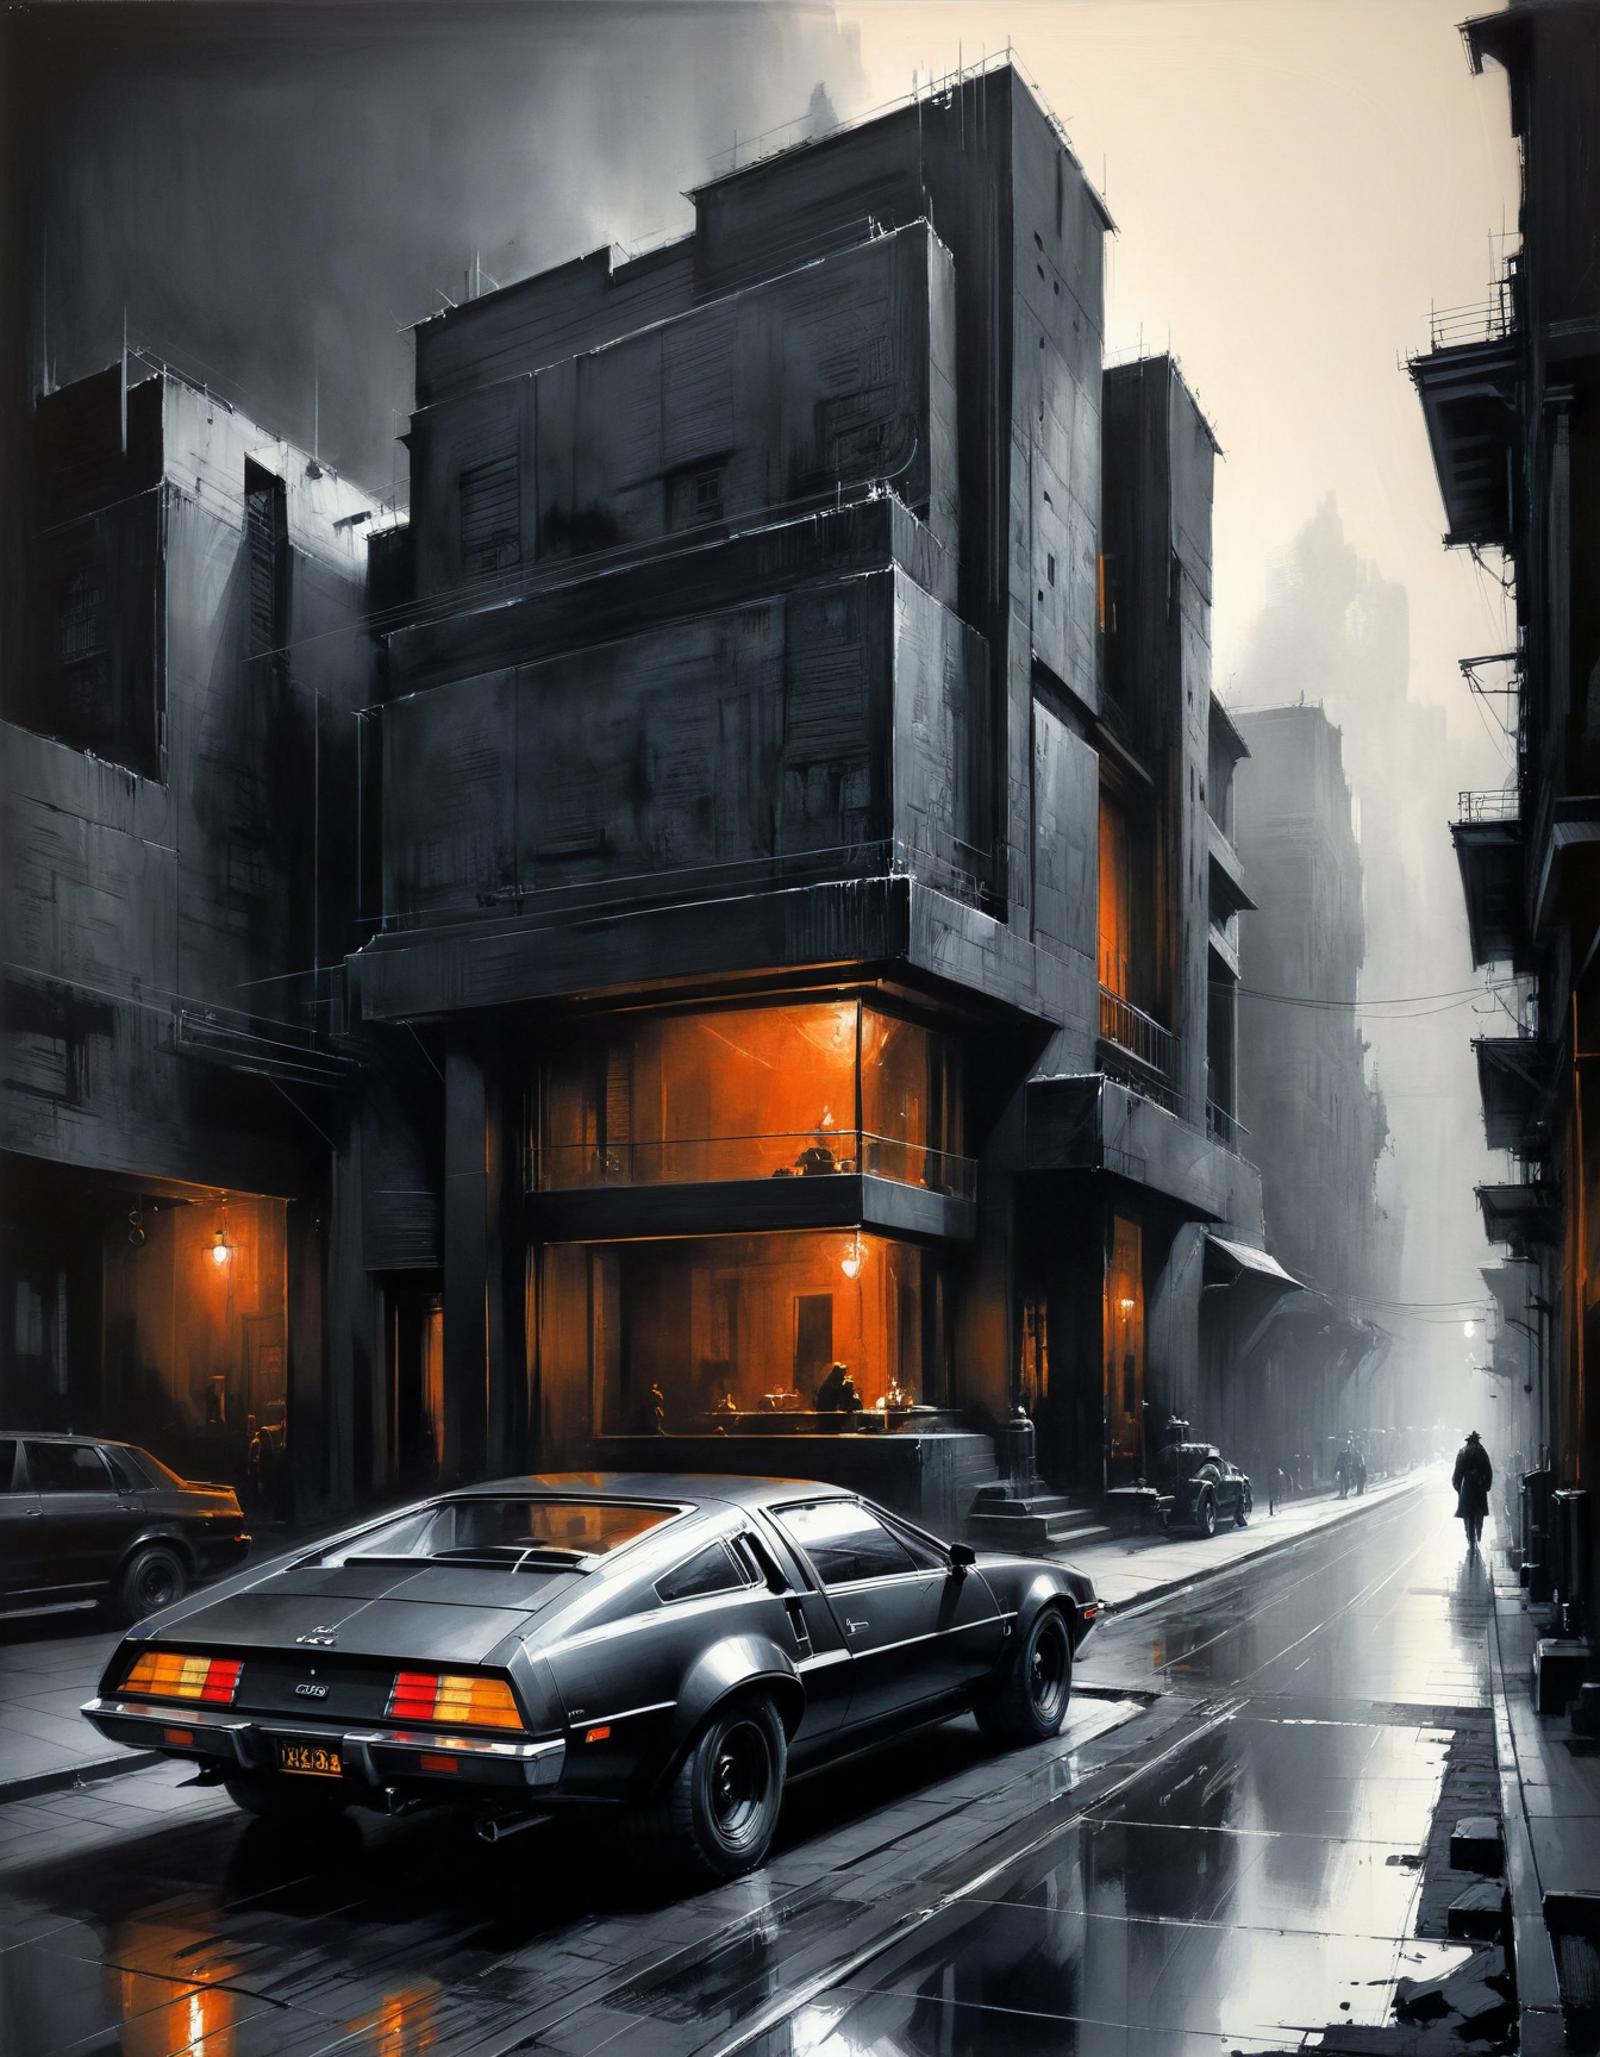 A futuristic city scene with a sports car driving down a wet street.